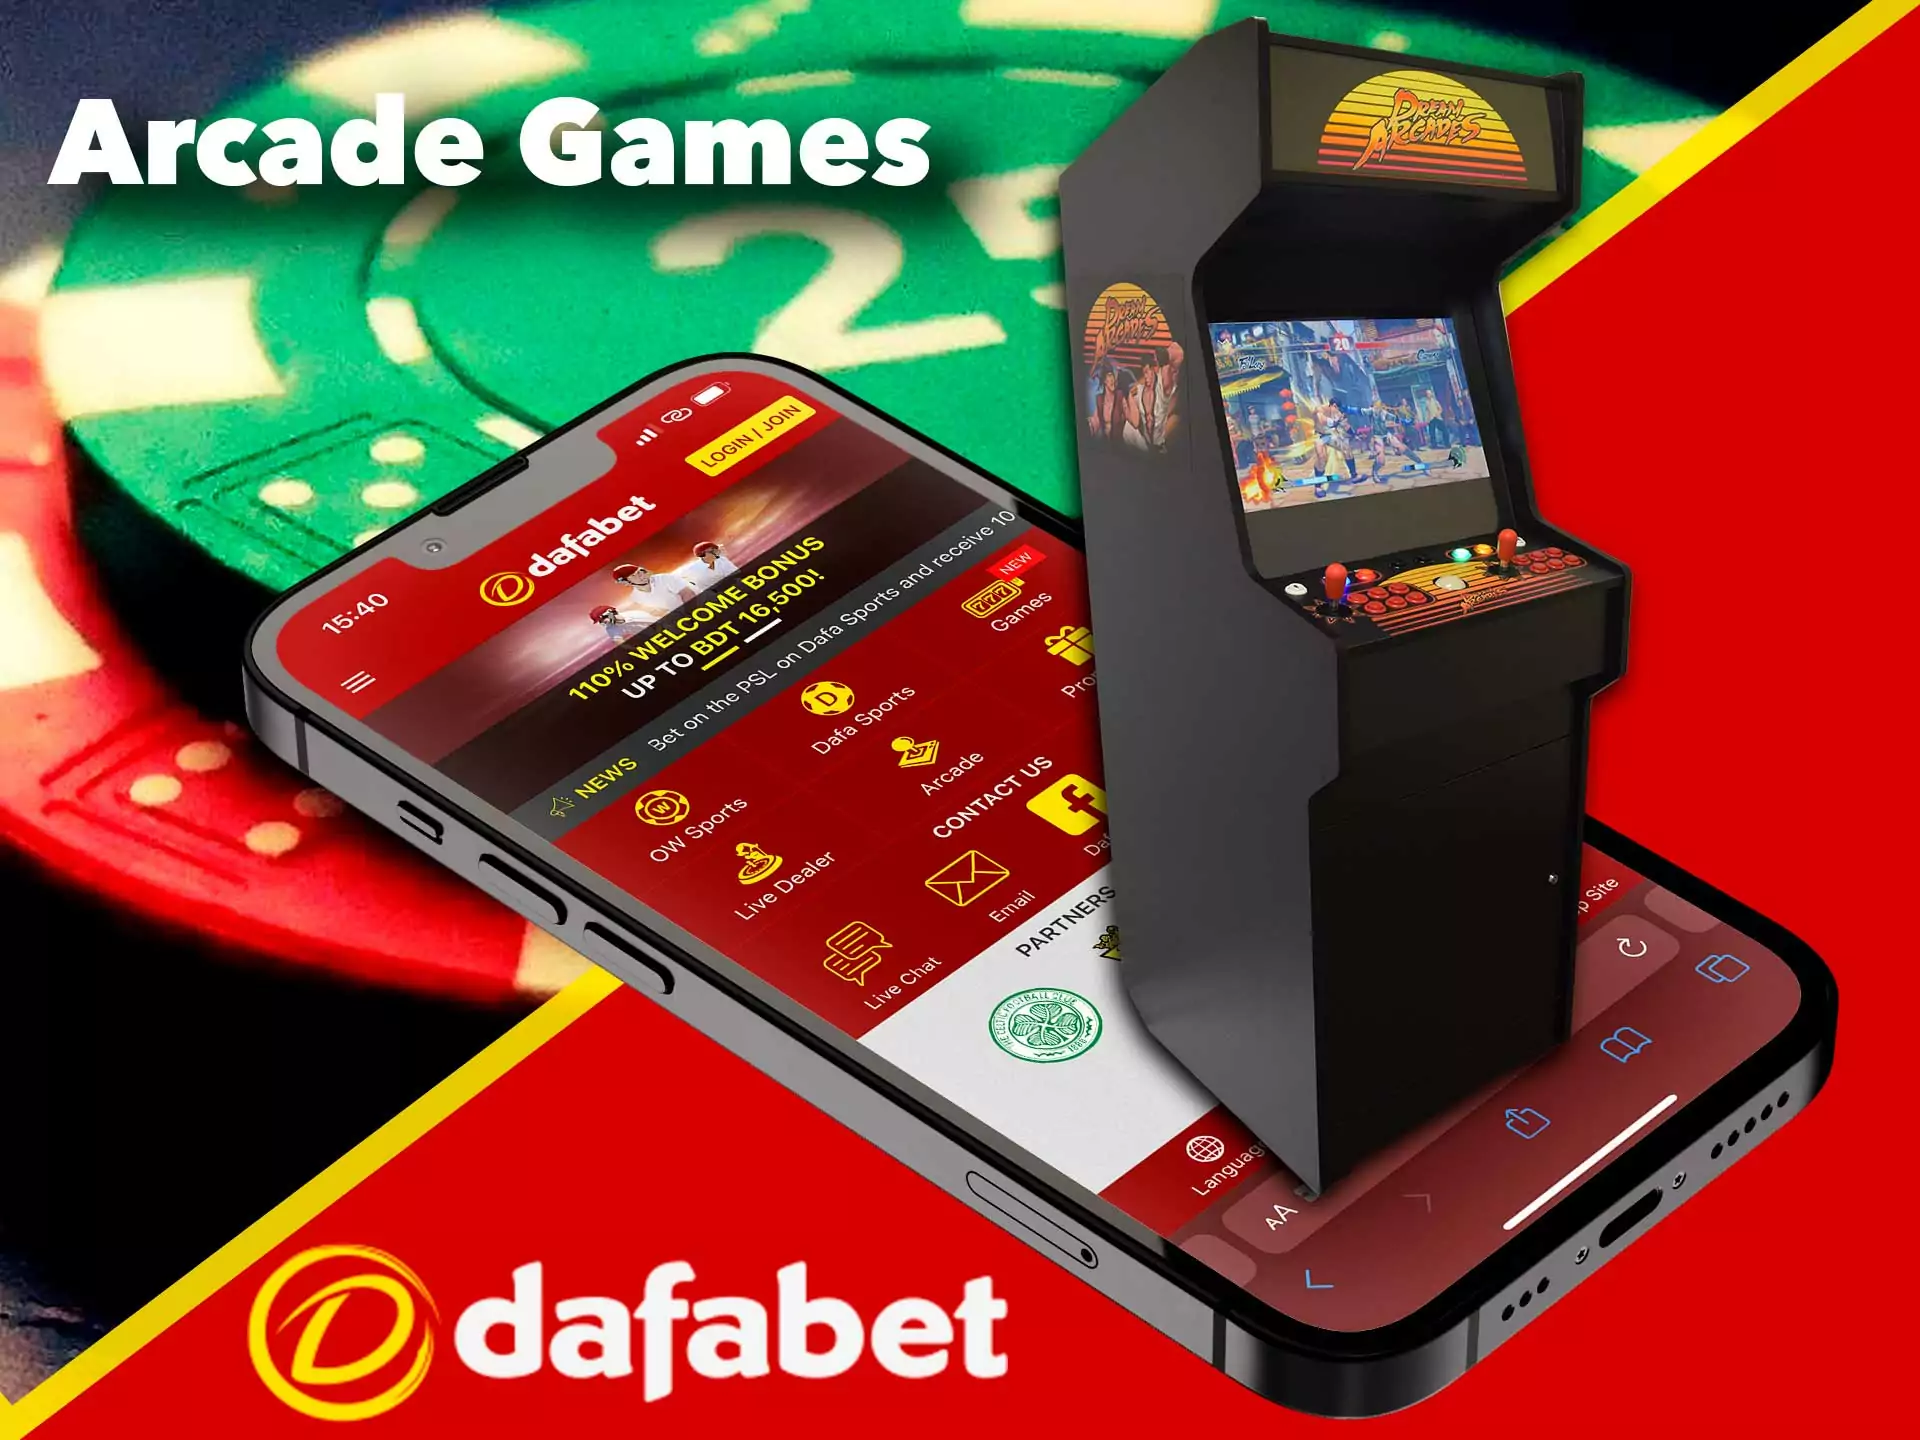 An additional section with games awaits you at Dafabet.